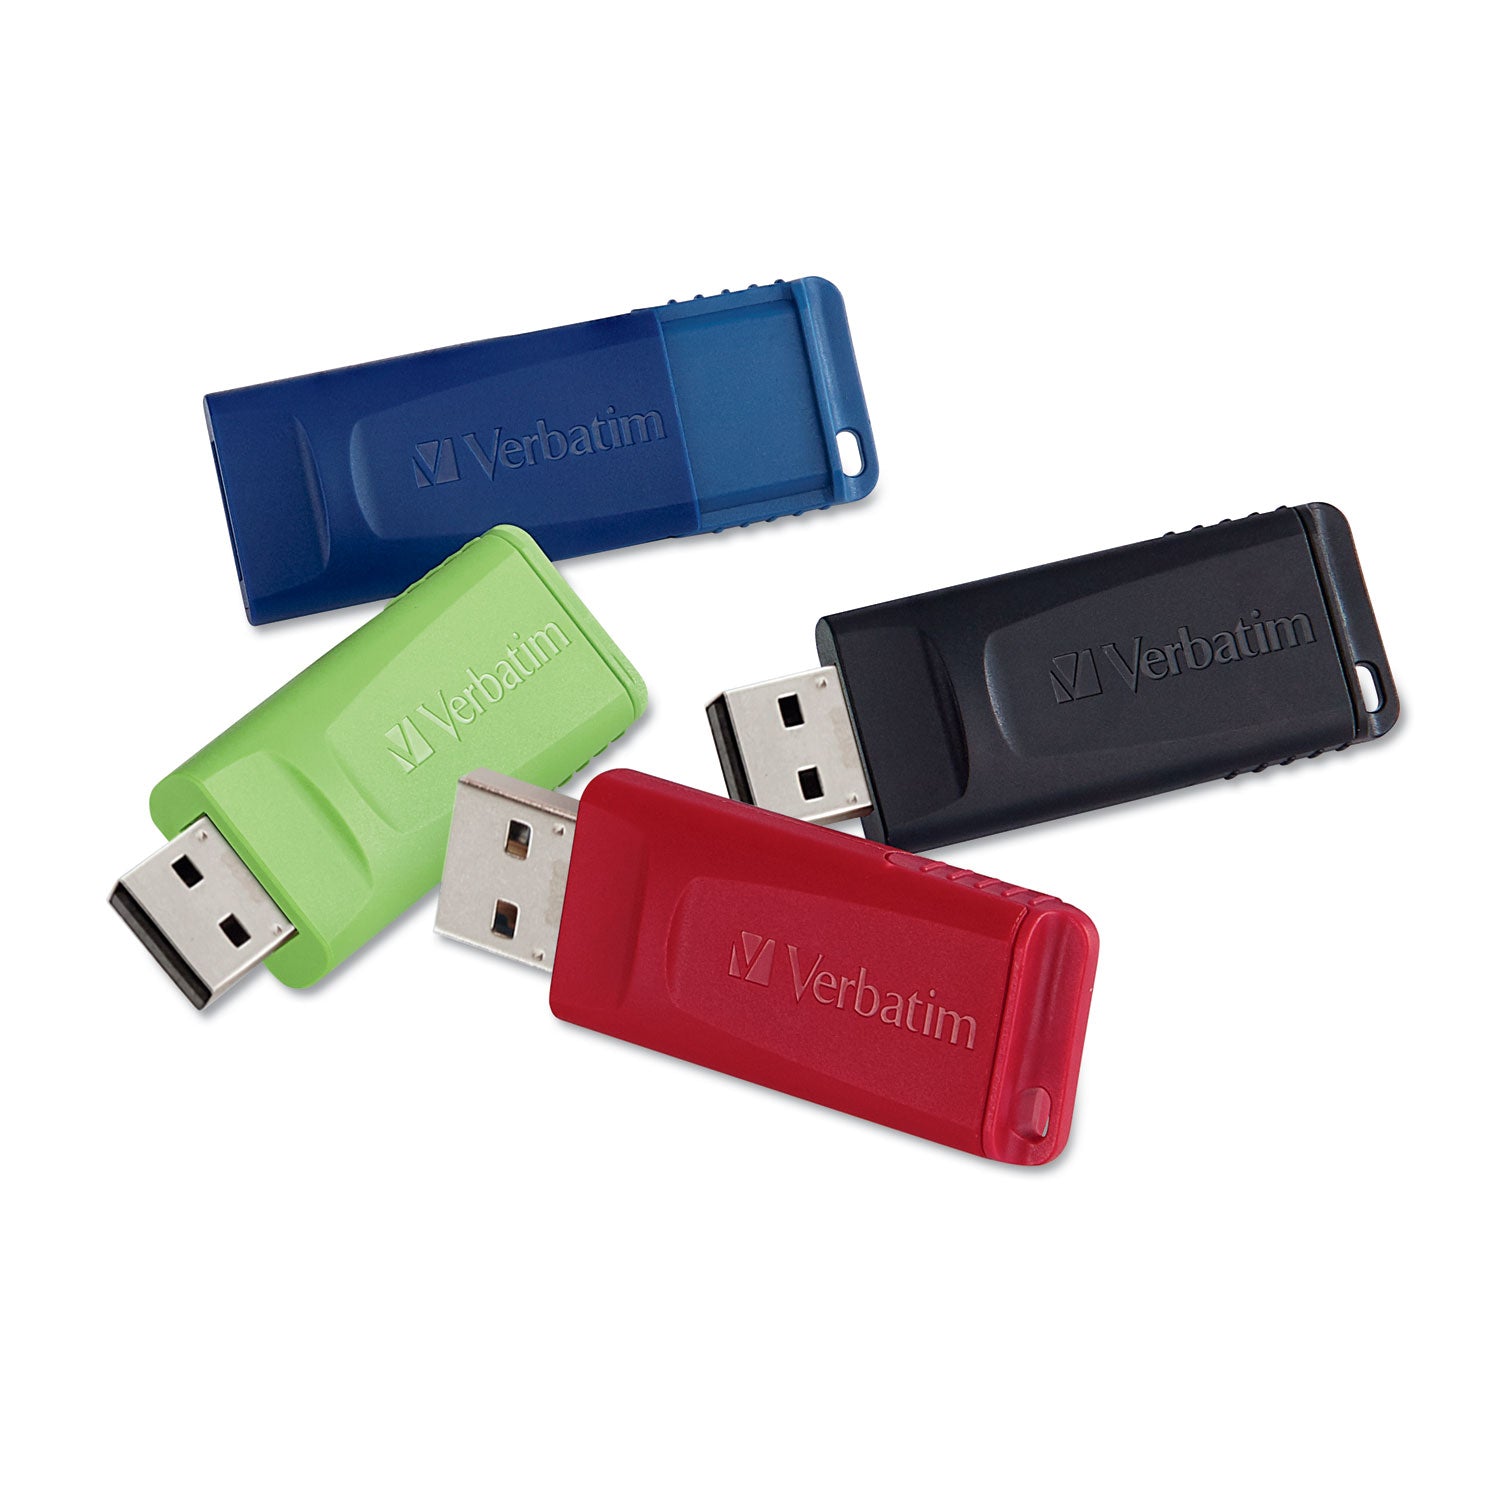 store-n-go-usb-flash-drive-16-gb-assorted-colors-4-pack_ver99123 - 1